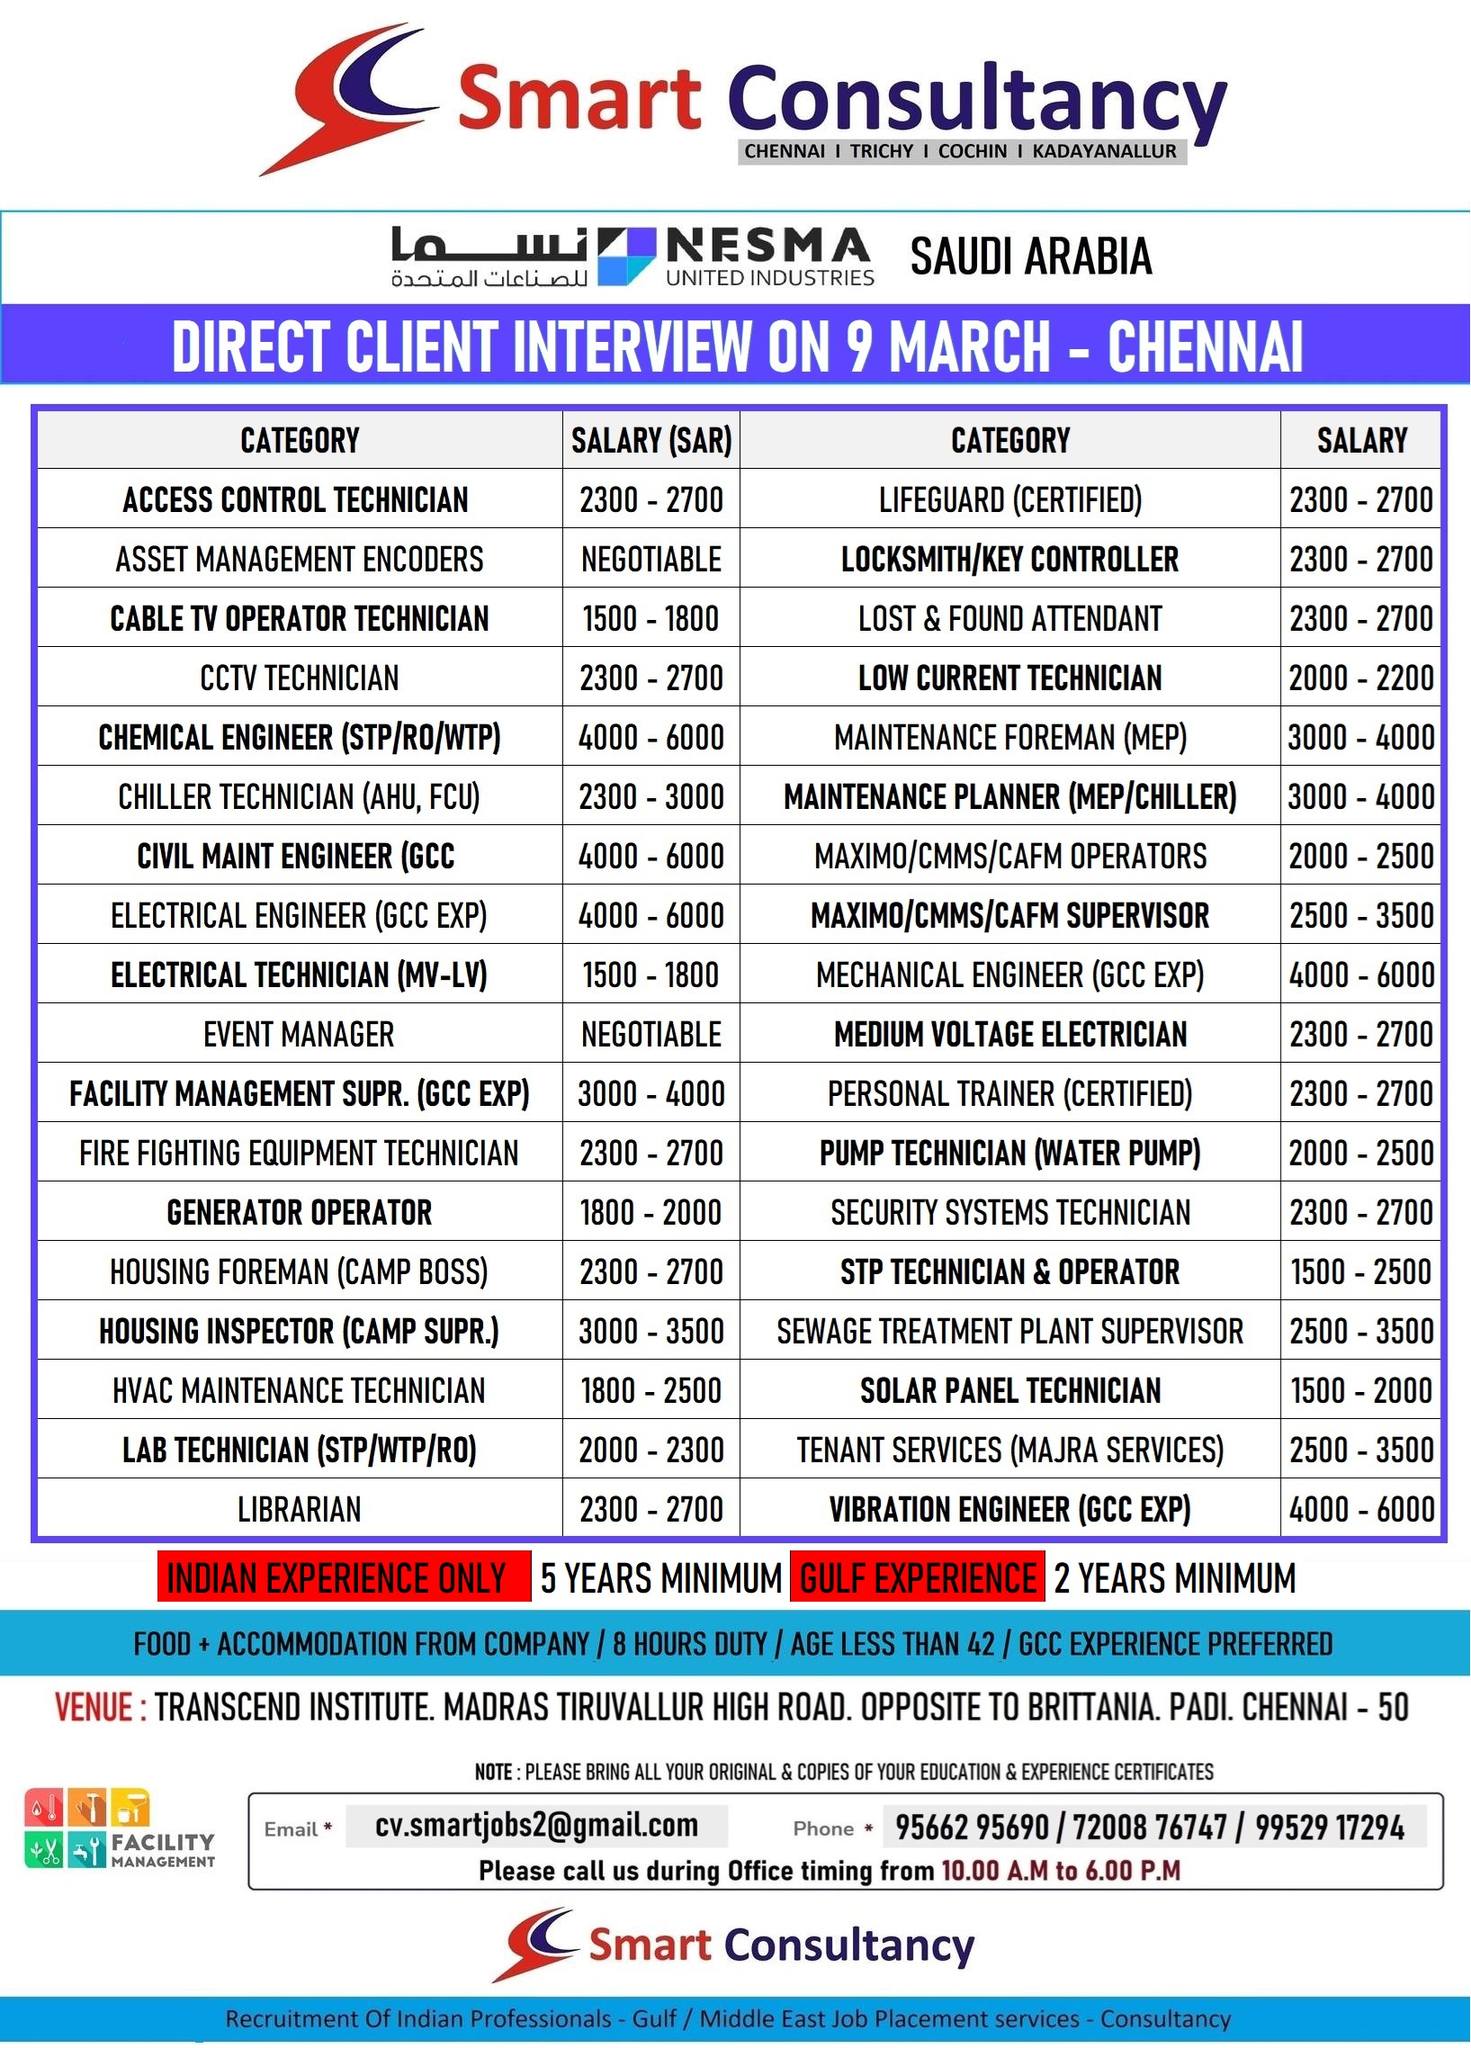 WANTED FOR A LEADING MAINTENANCE COMPANY – SAUDI / DIRECT CLIENT INTERVIEW ON 9 MARCH – CHENNAI